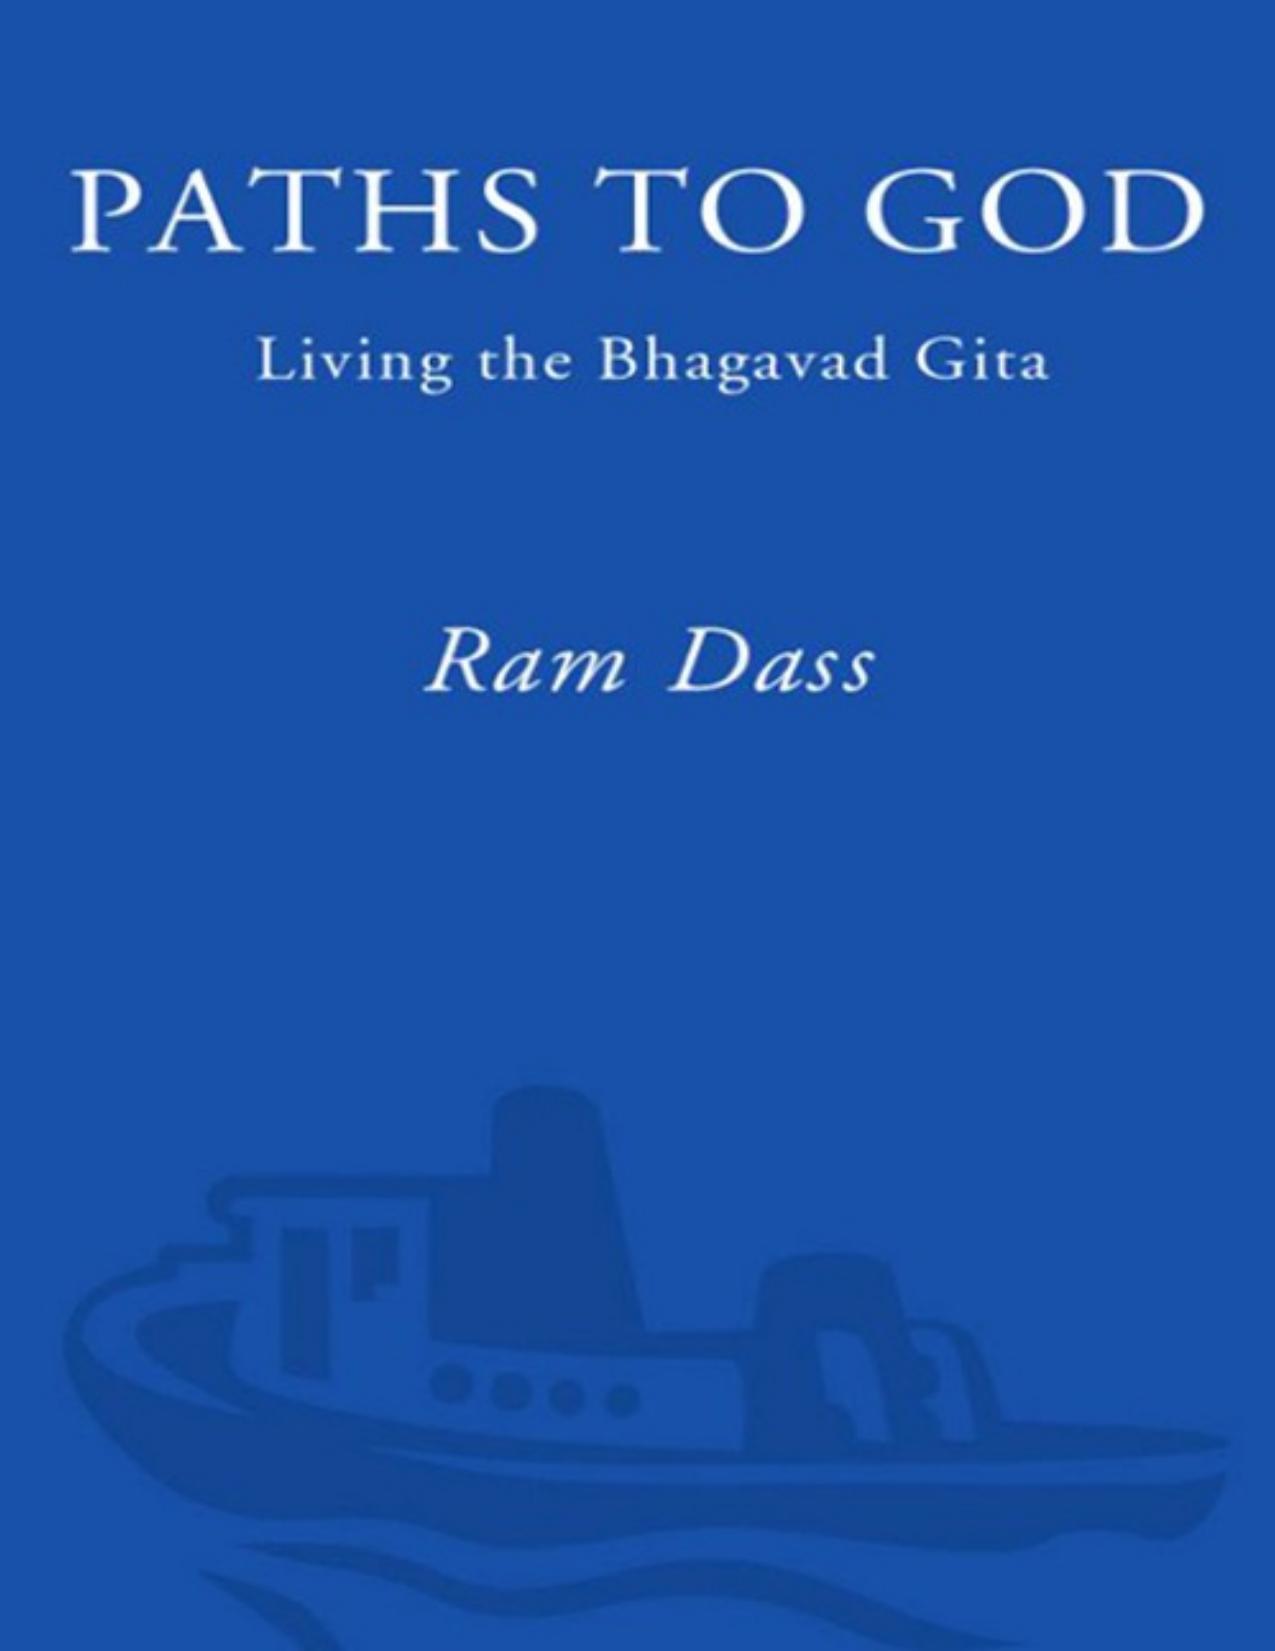 Paths to God by Ram Dass